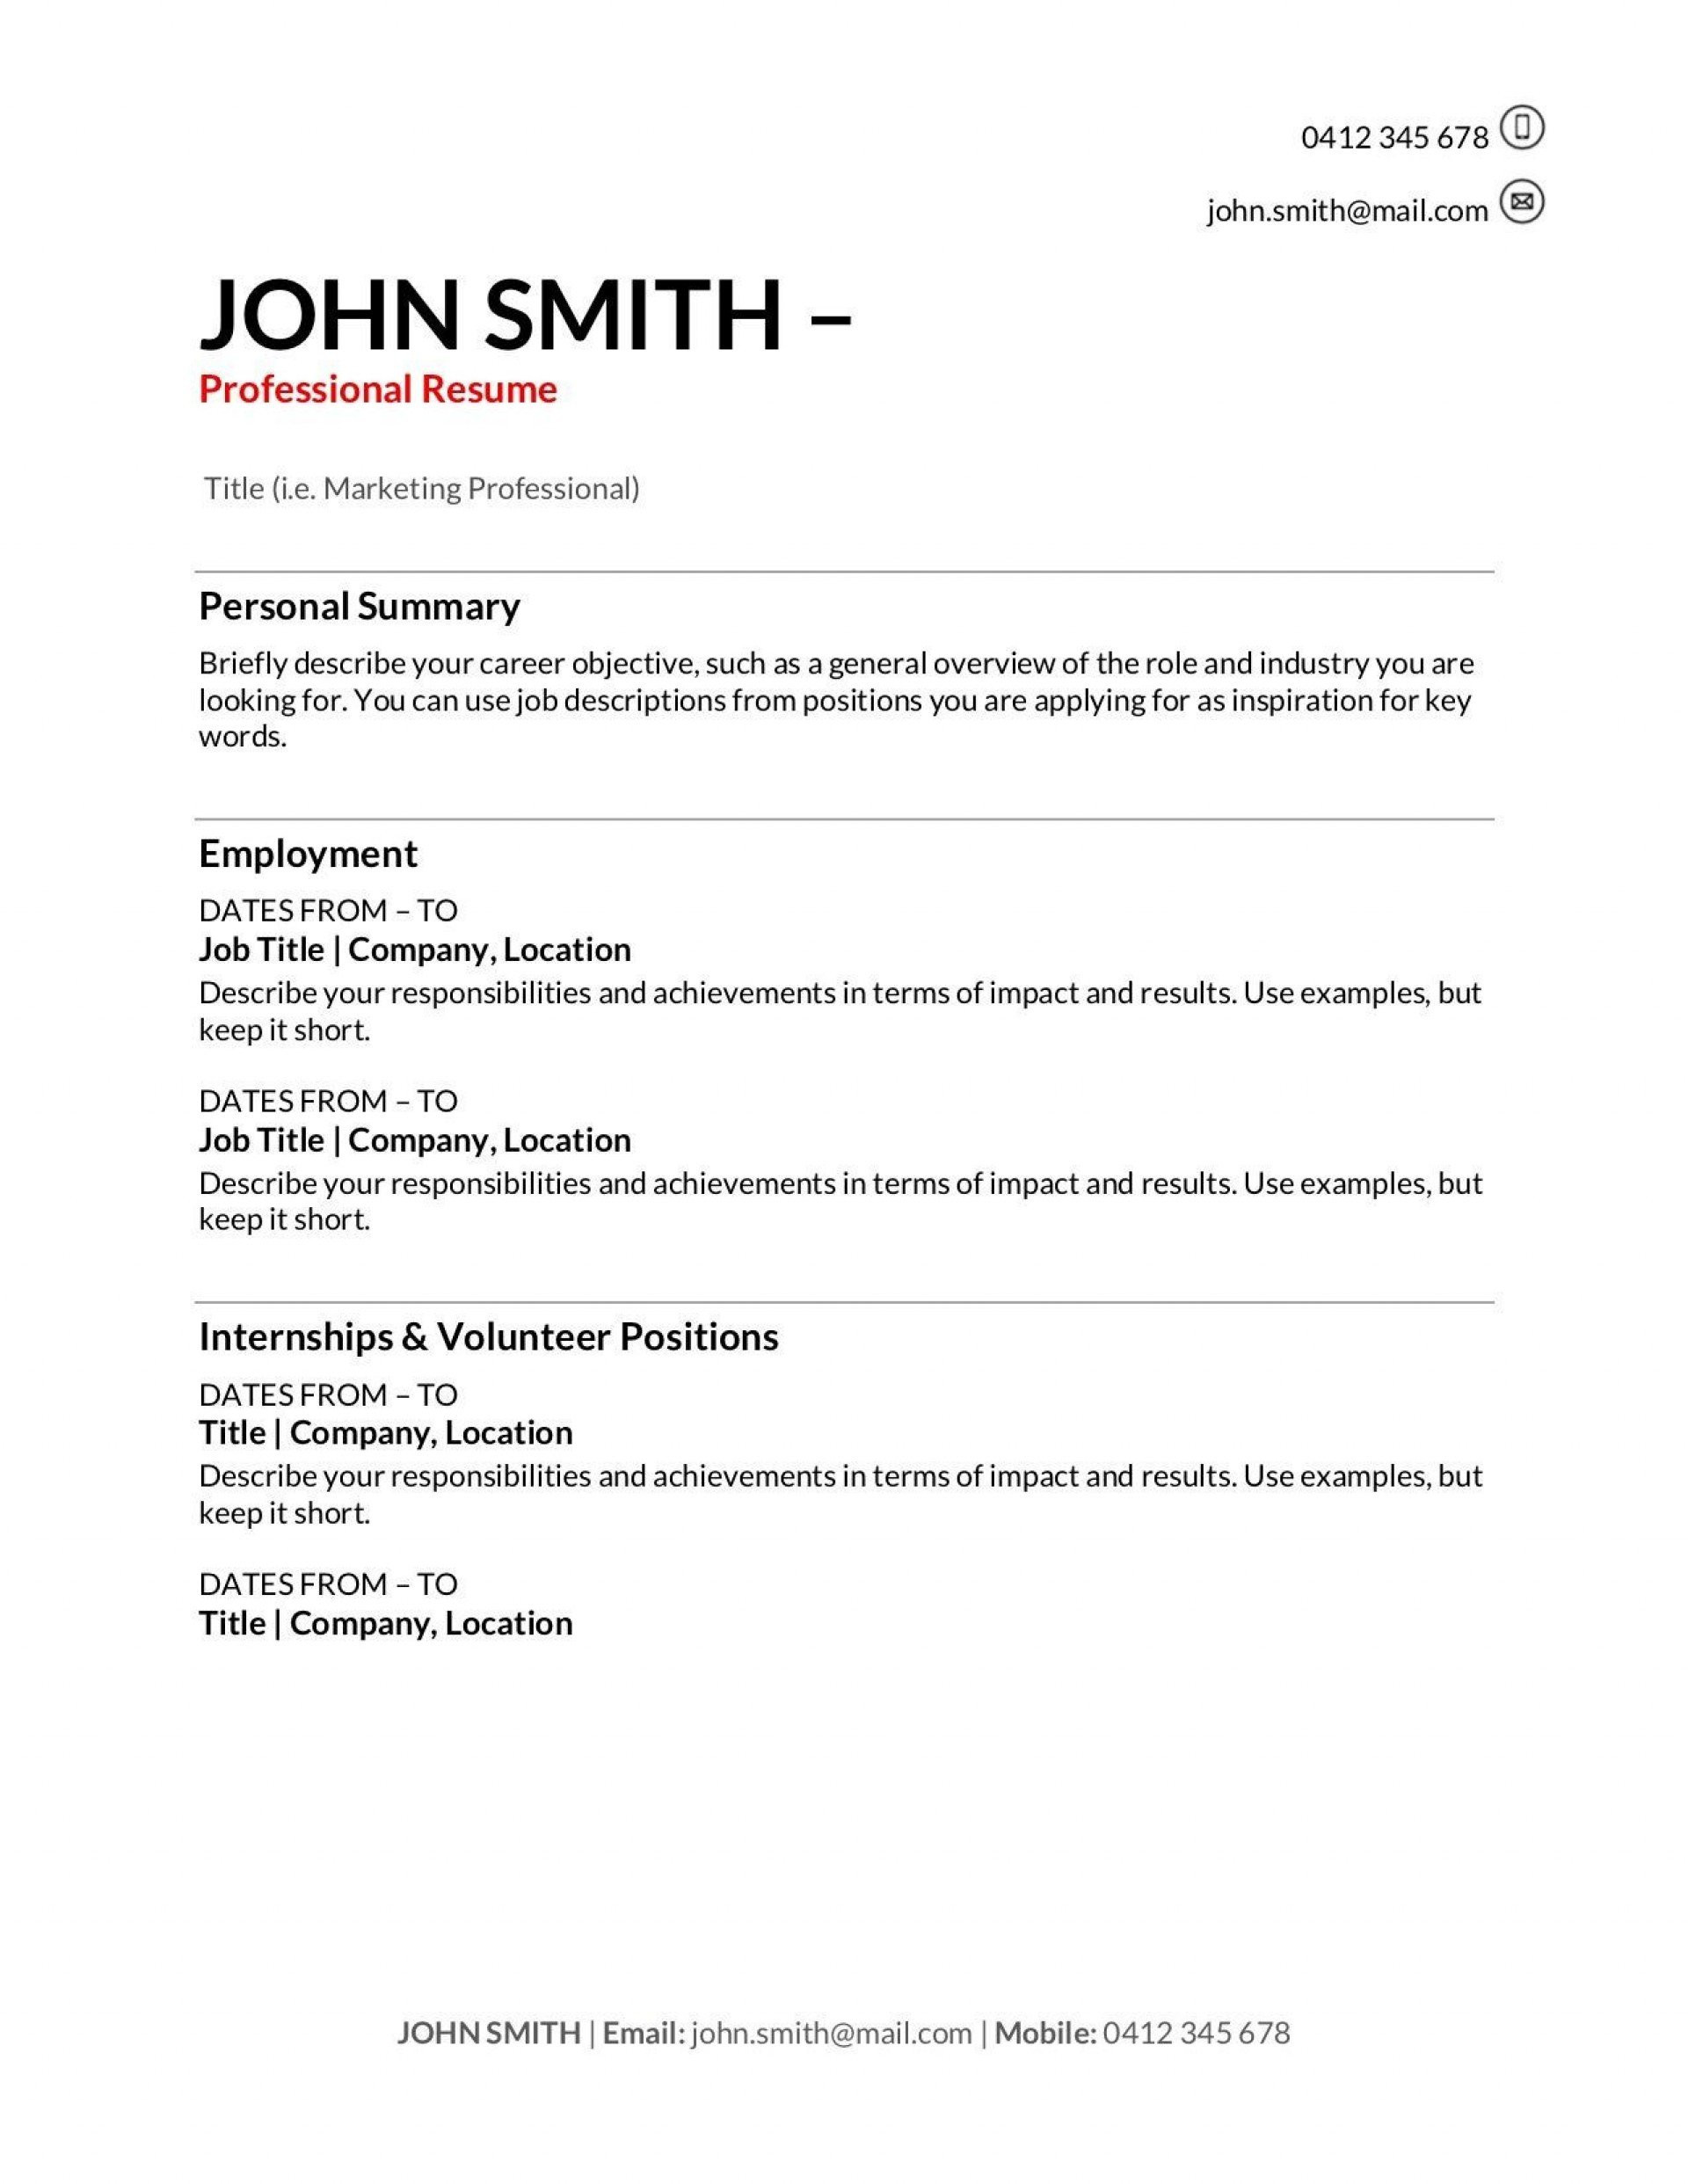 Basic Resume Template for First Job How to Make A Resume for Your First Job Examples – Master Your Resume